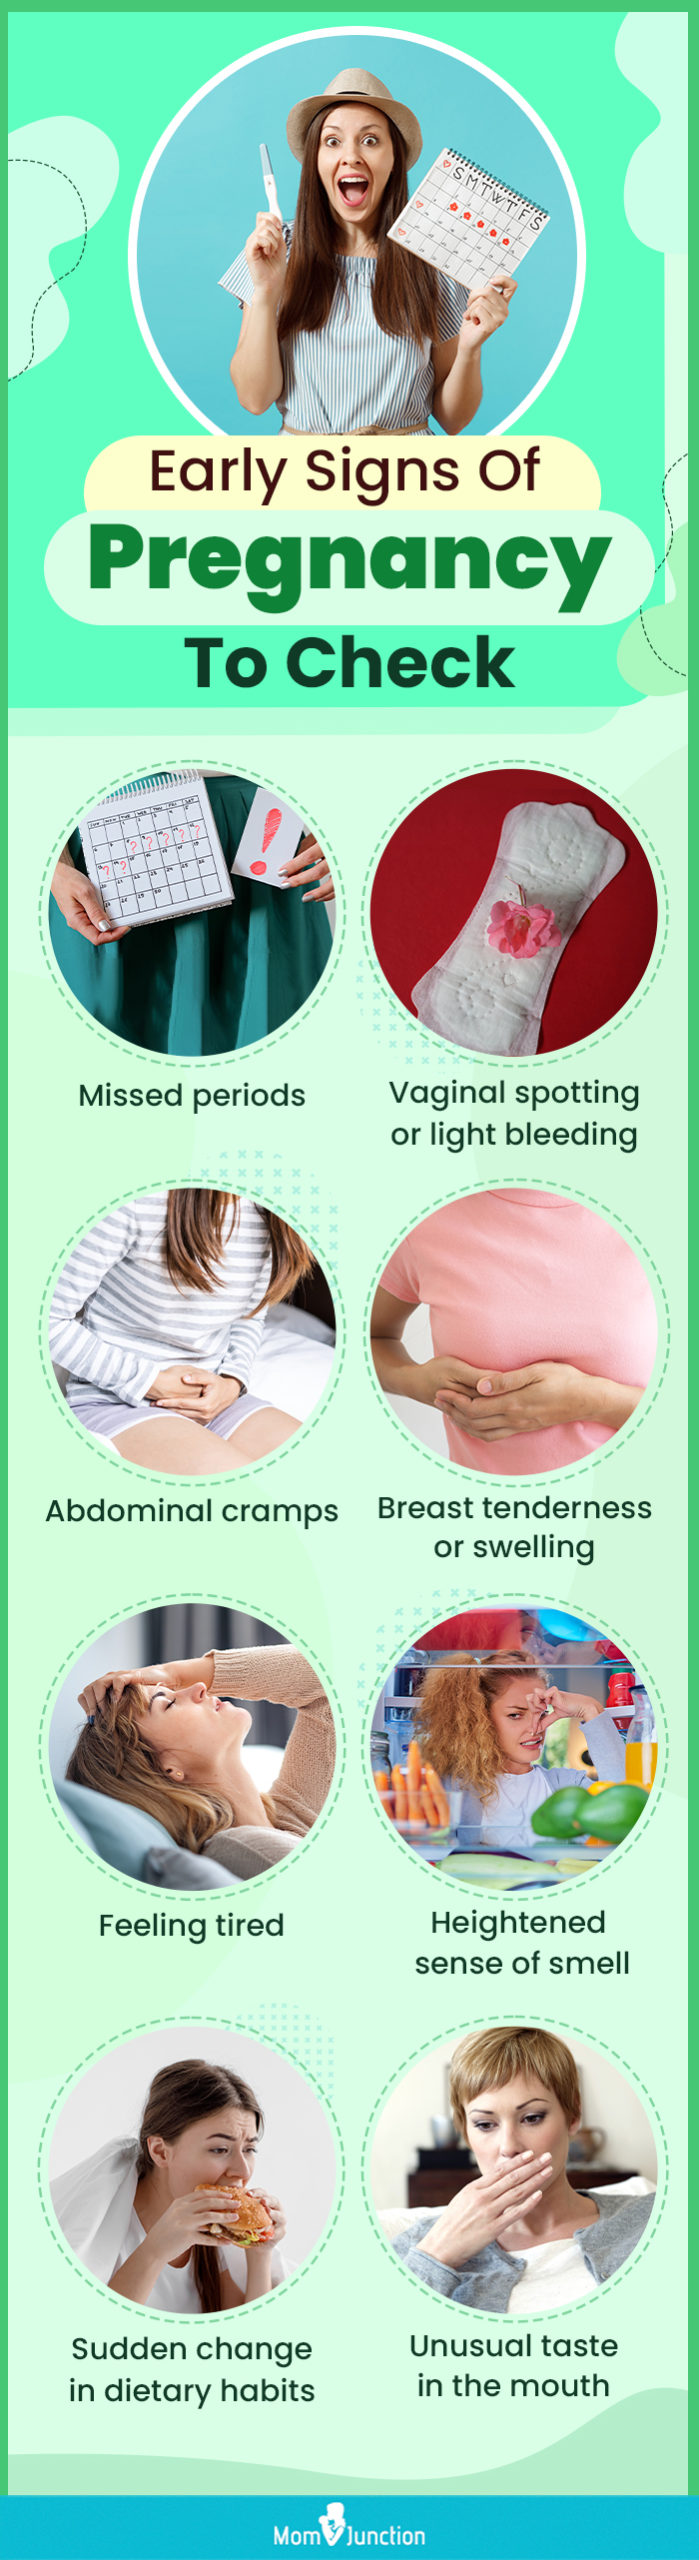 early signs of pregnancy to check (infographic)